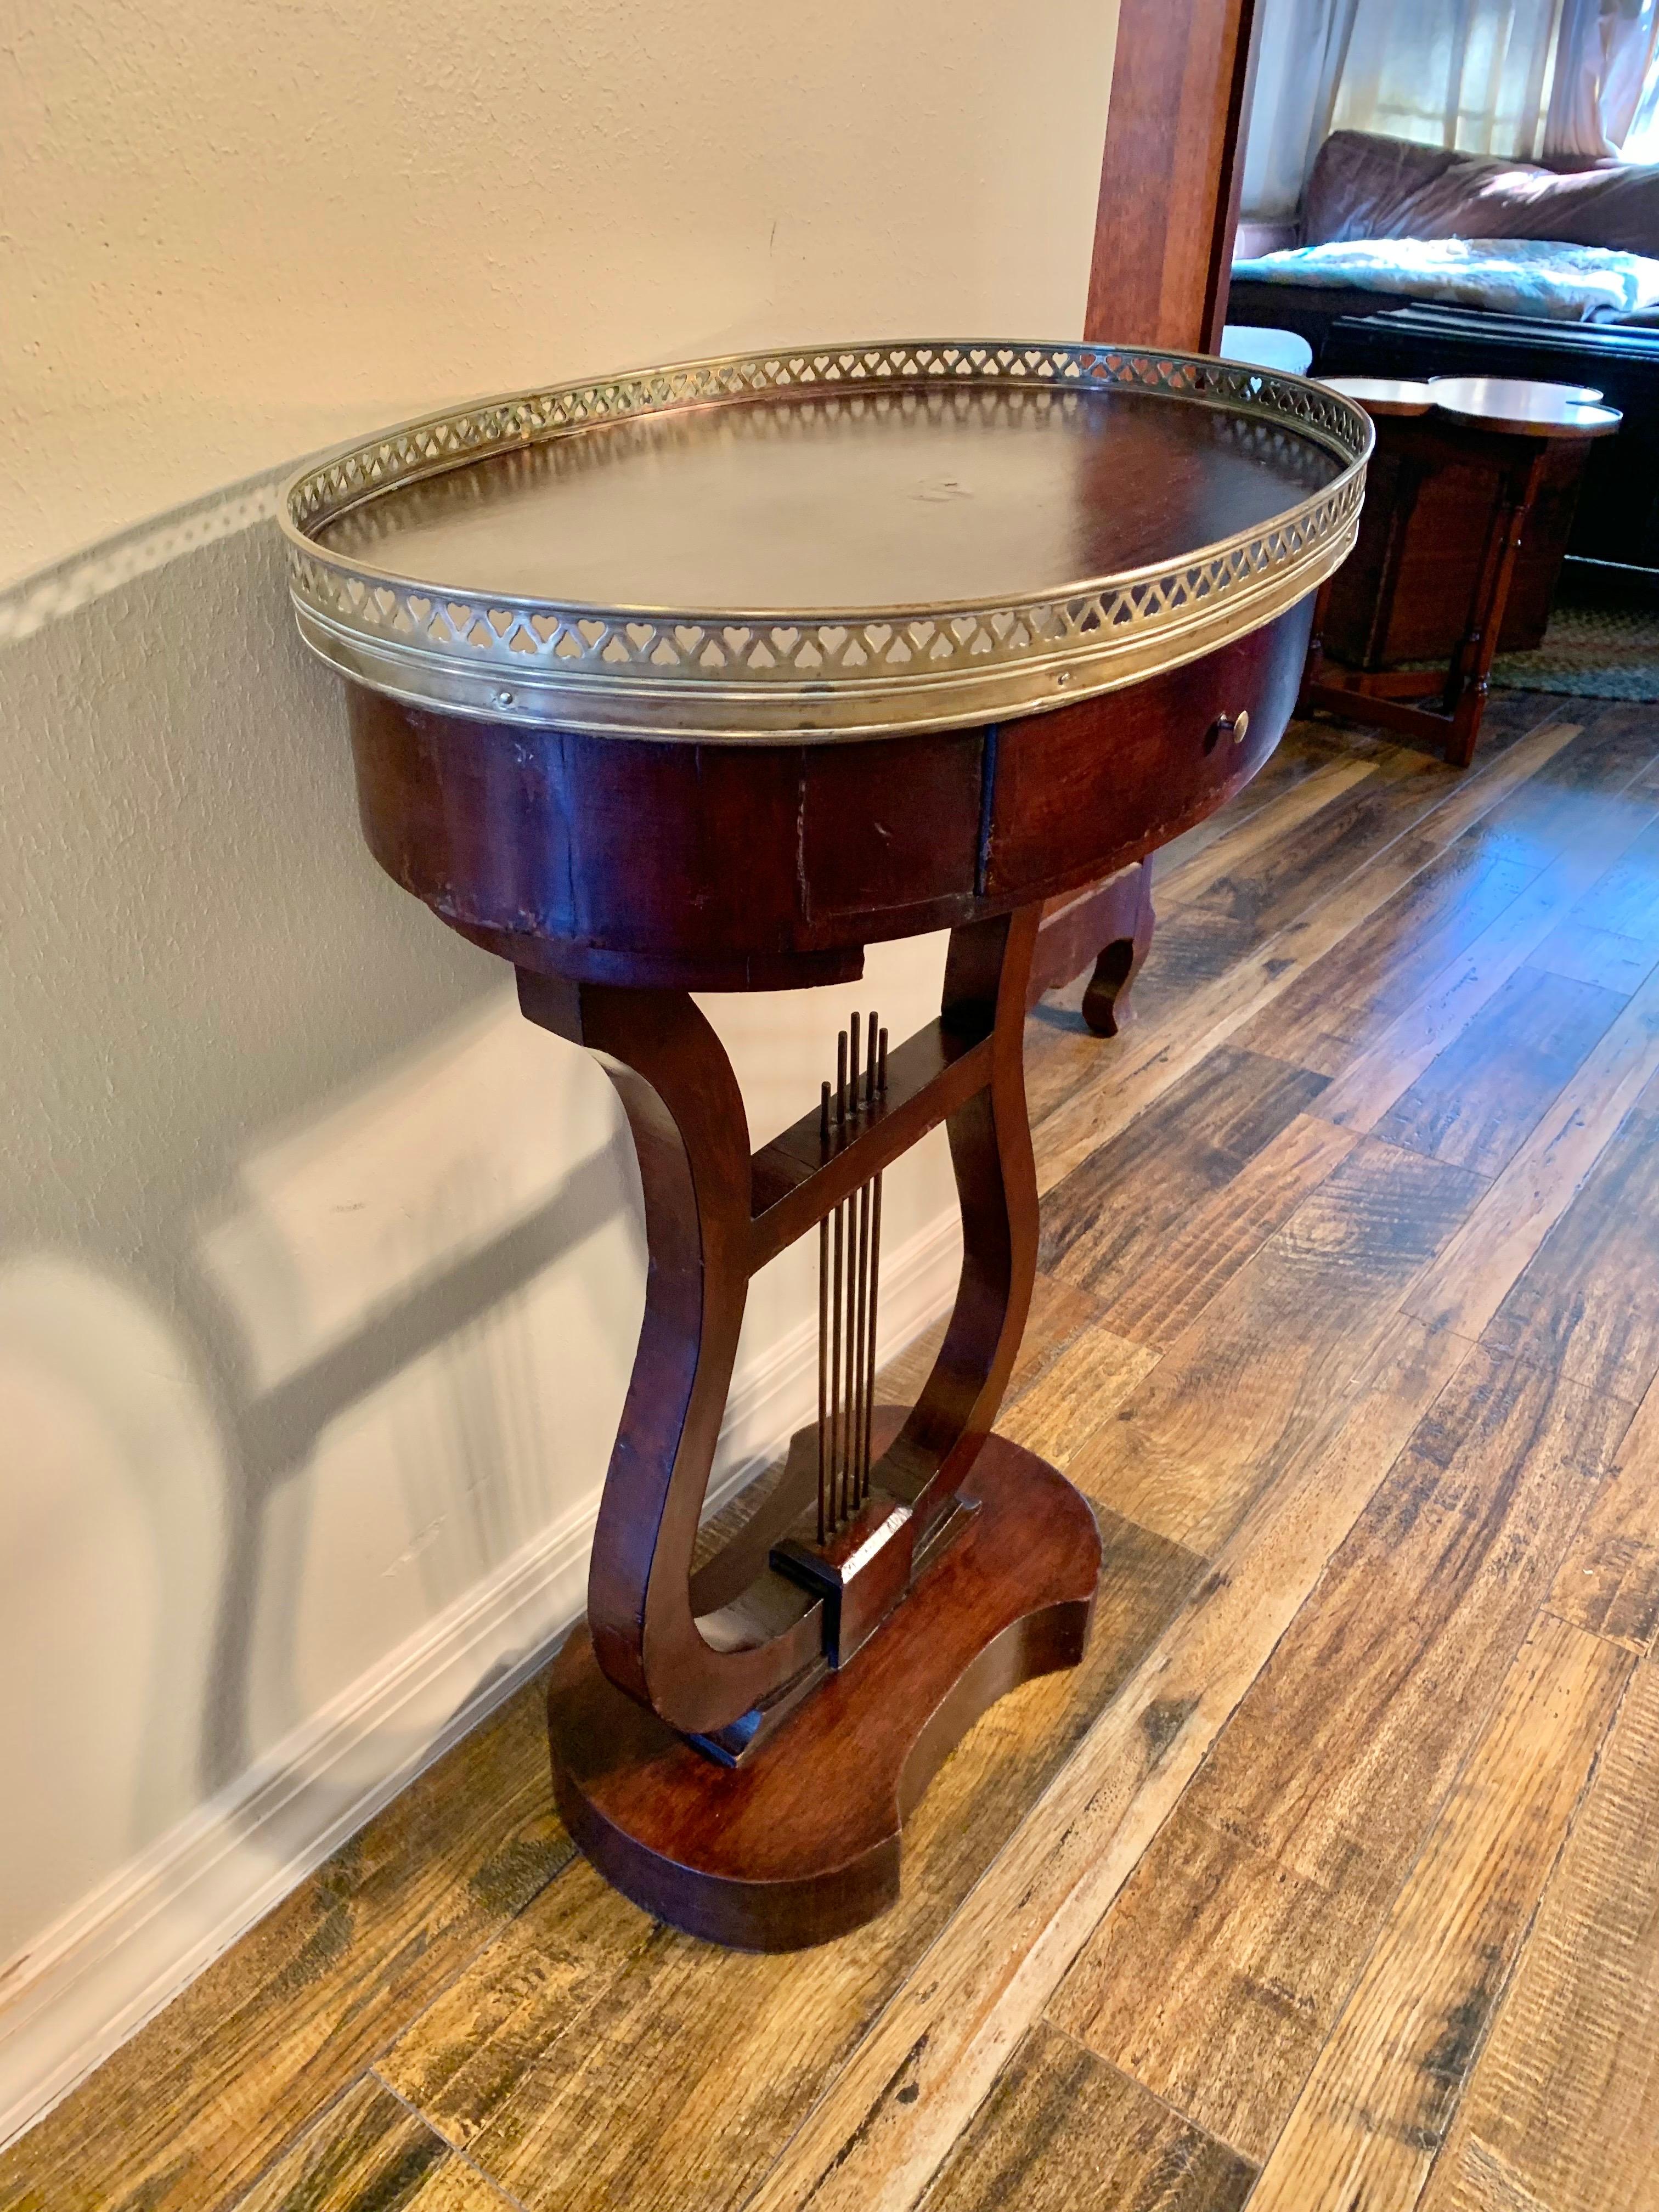 This Late 19th Century French Harp or Lyre Style Side Table is constructed with a wood oval top lined with a pierced brass gallery. The one drawer is adorned with an antique brass knob and the two harp shaped legs rest on a wood base. Perfect for